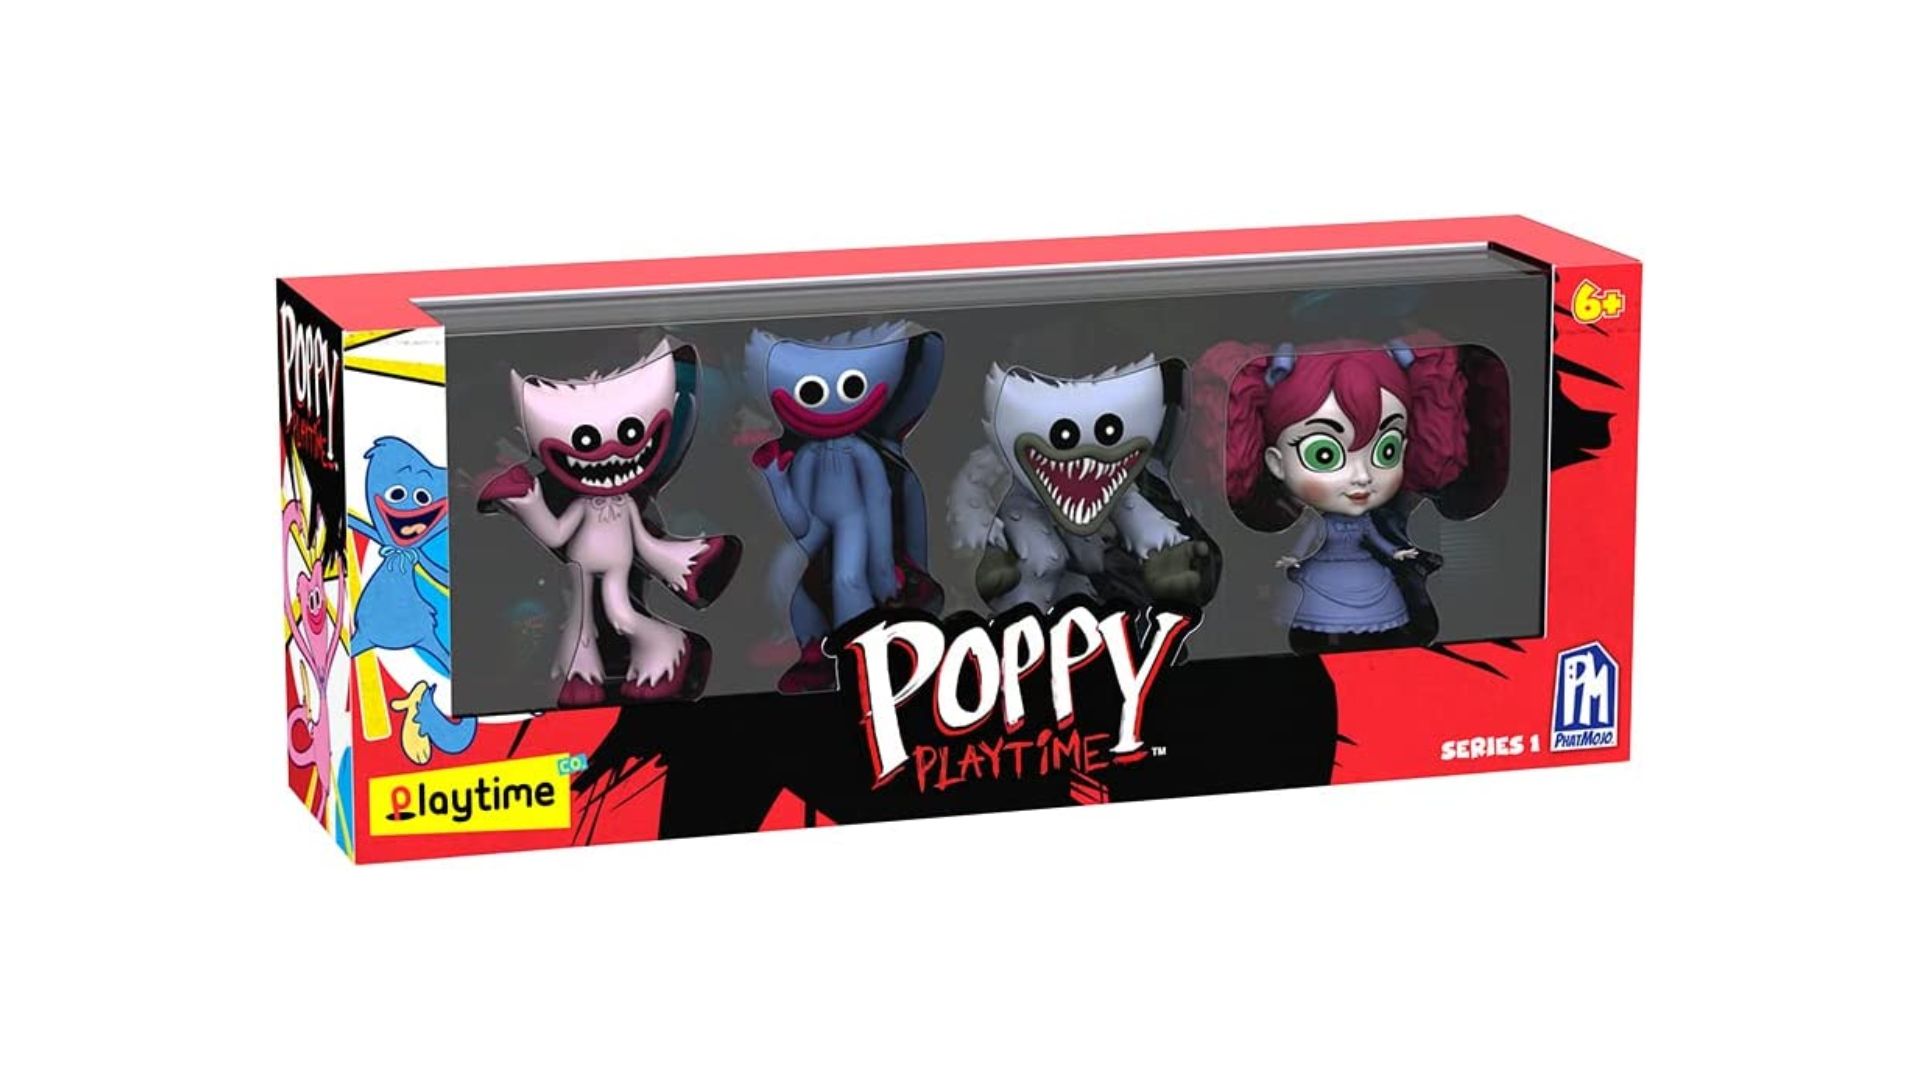 POPPY PLAYTIME - Minifigure Collector Case Set Featuring Huggy